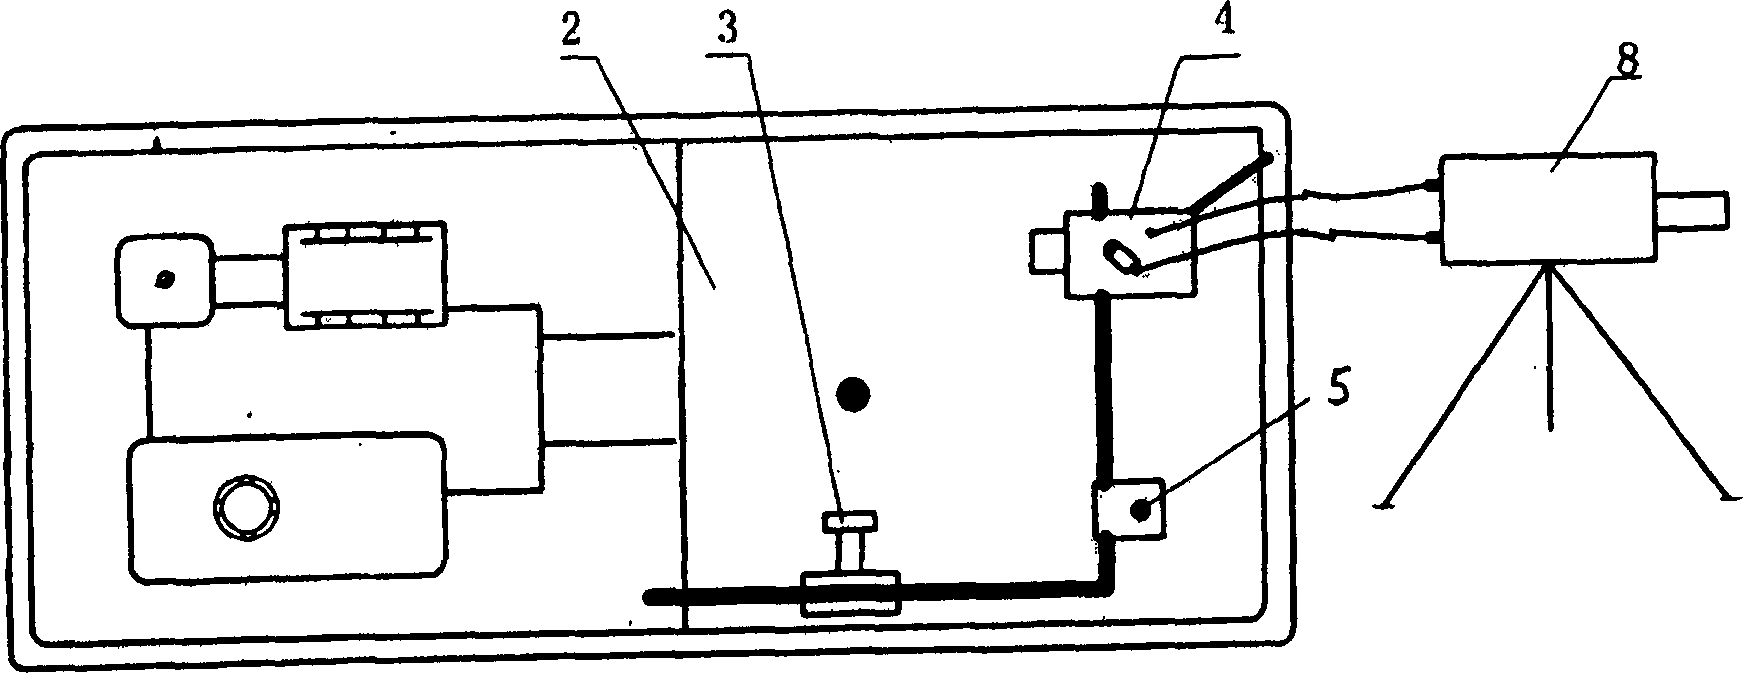 Portable gate hoist and operating method thereof